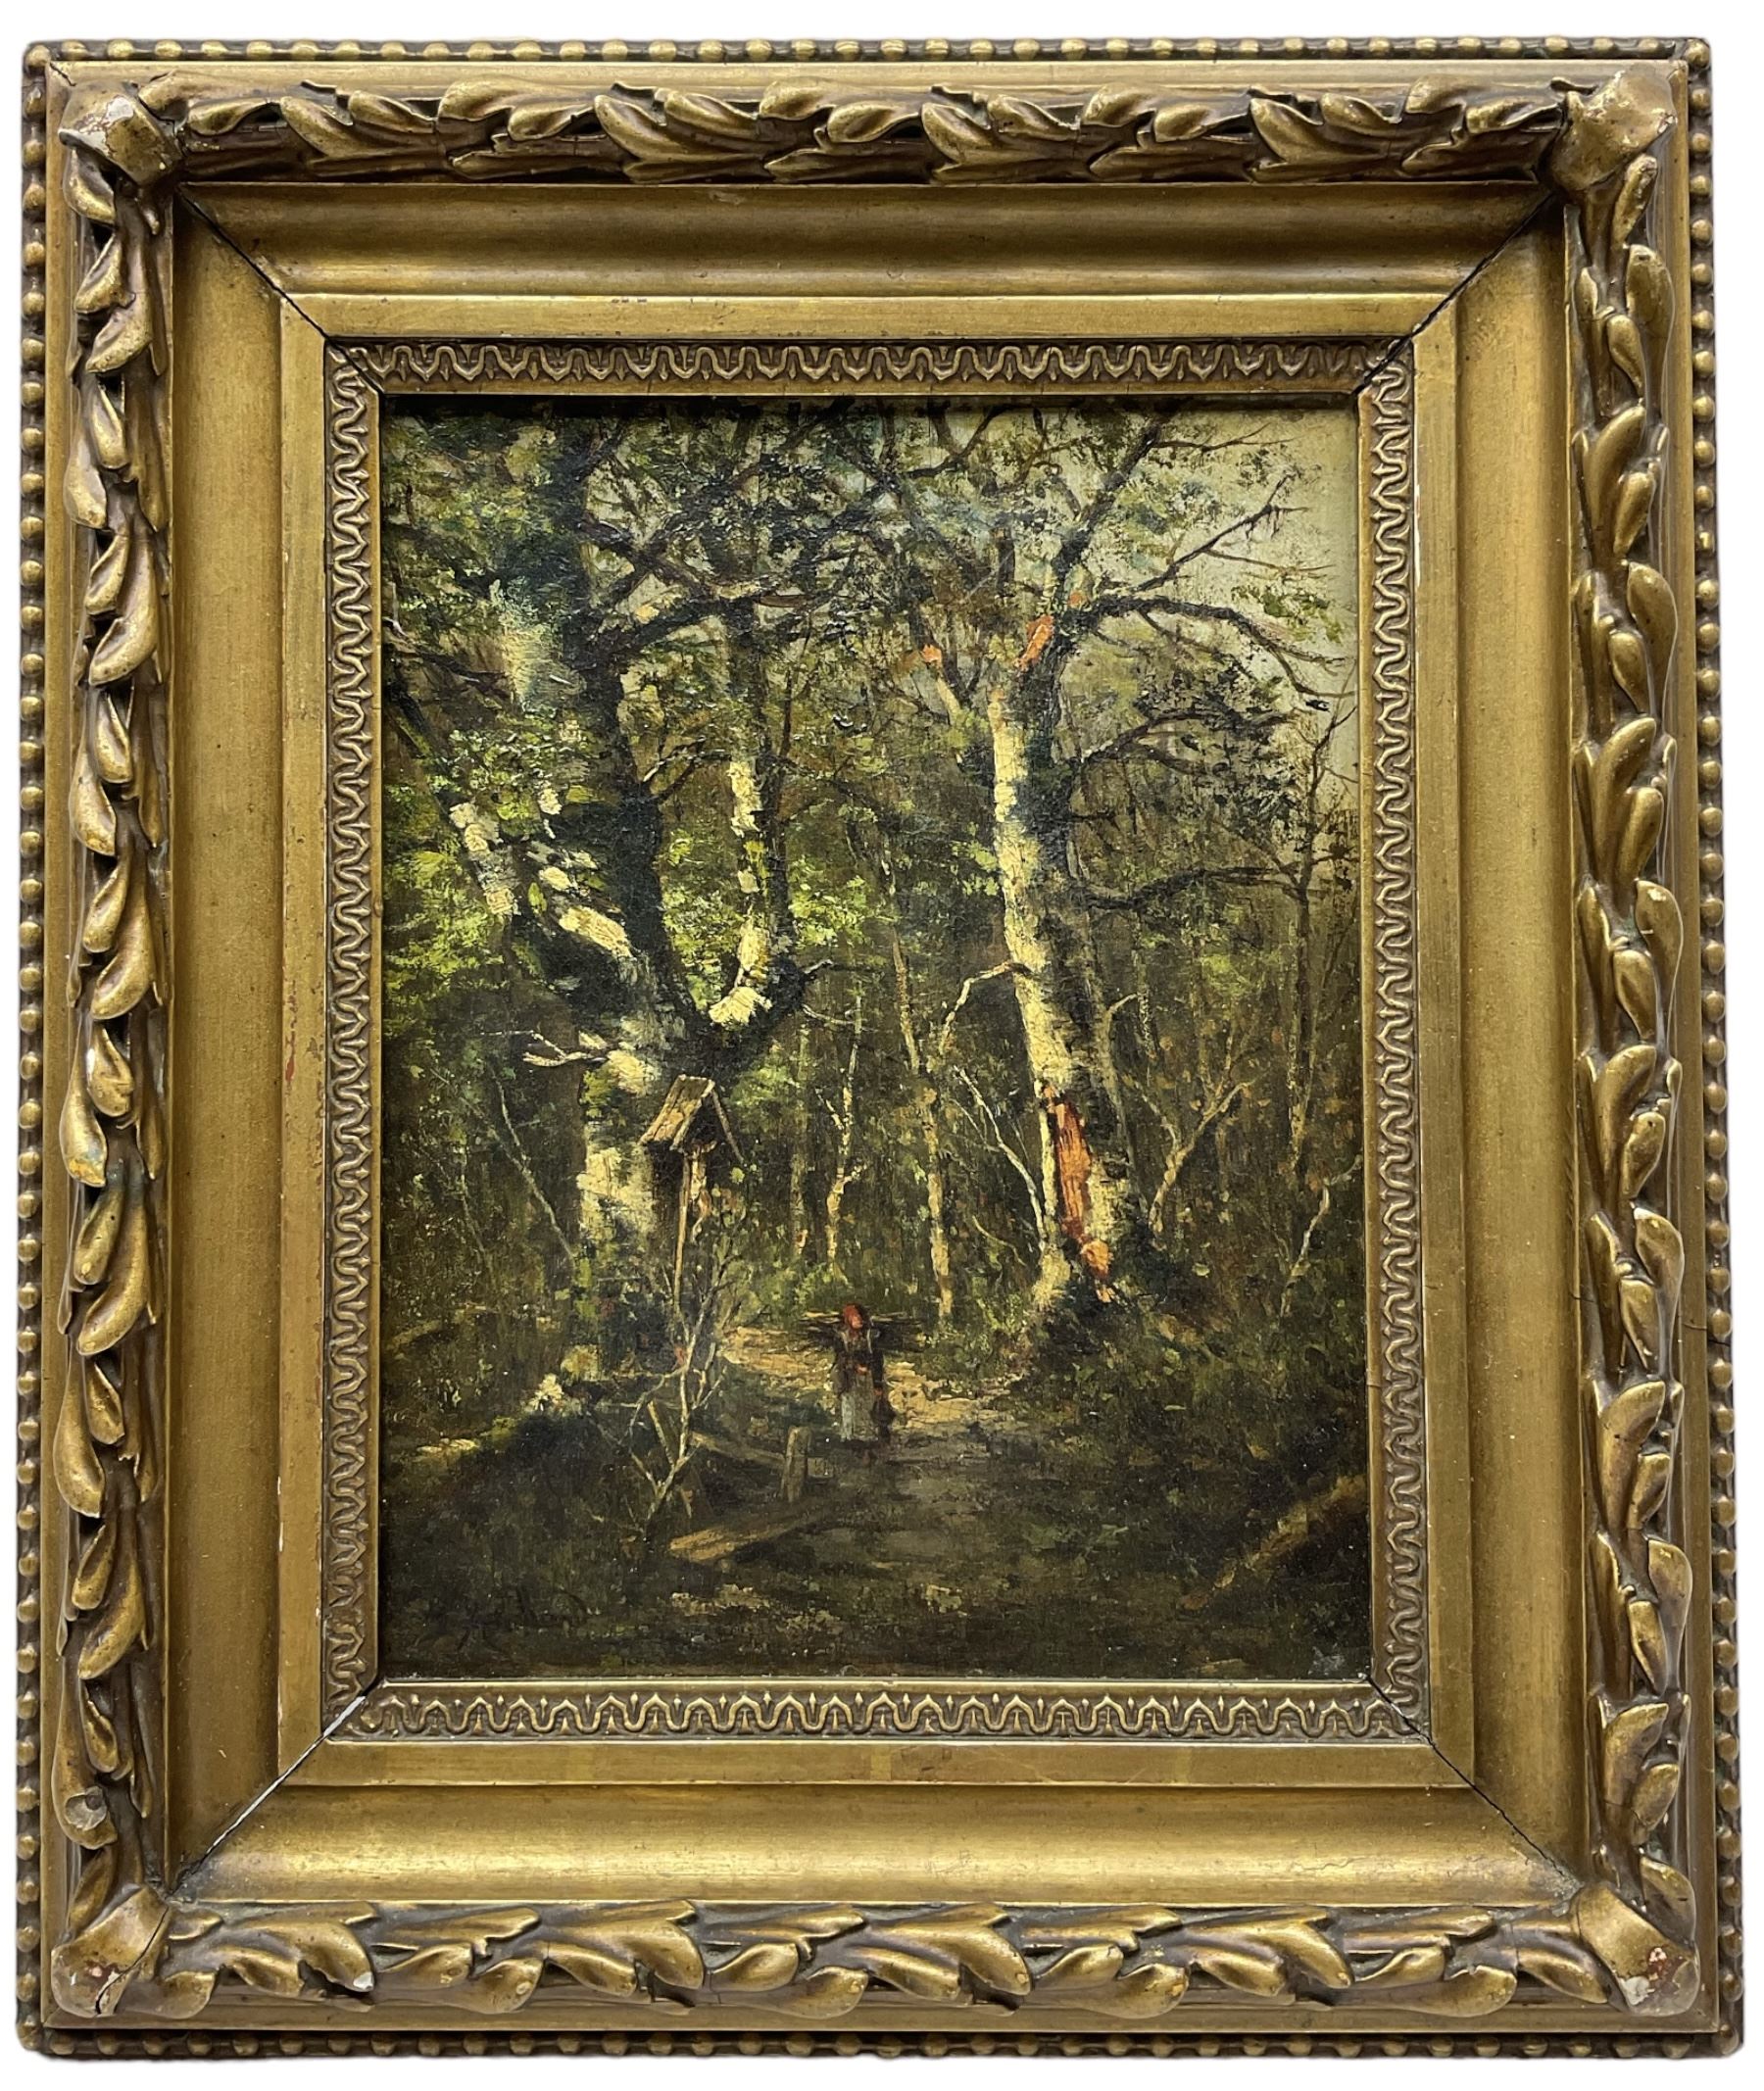 English School (19th century): Gathering Firewood in a Silver Birch Forest - Image 2 of 3